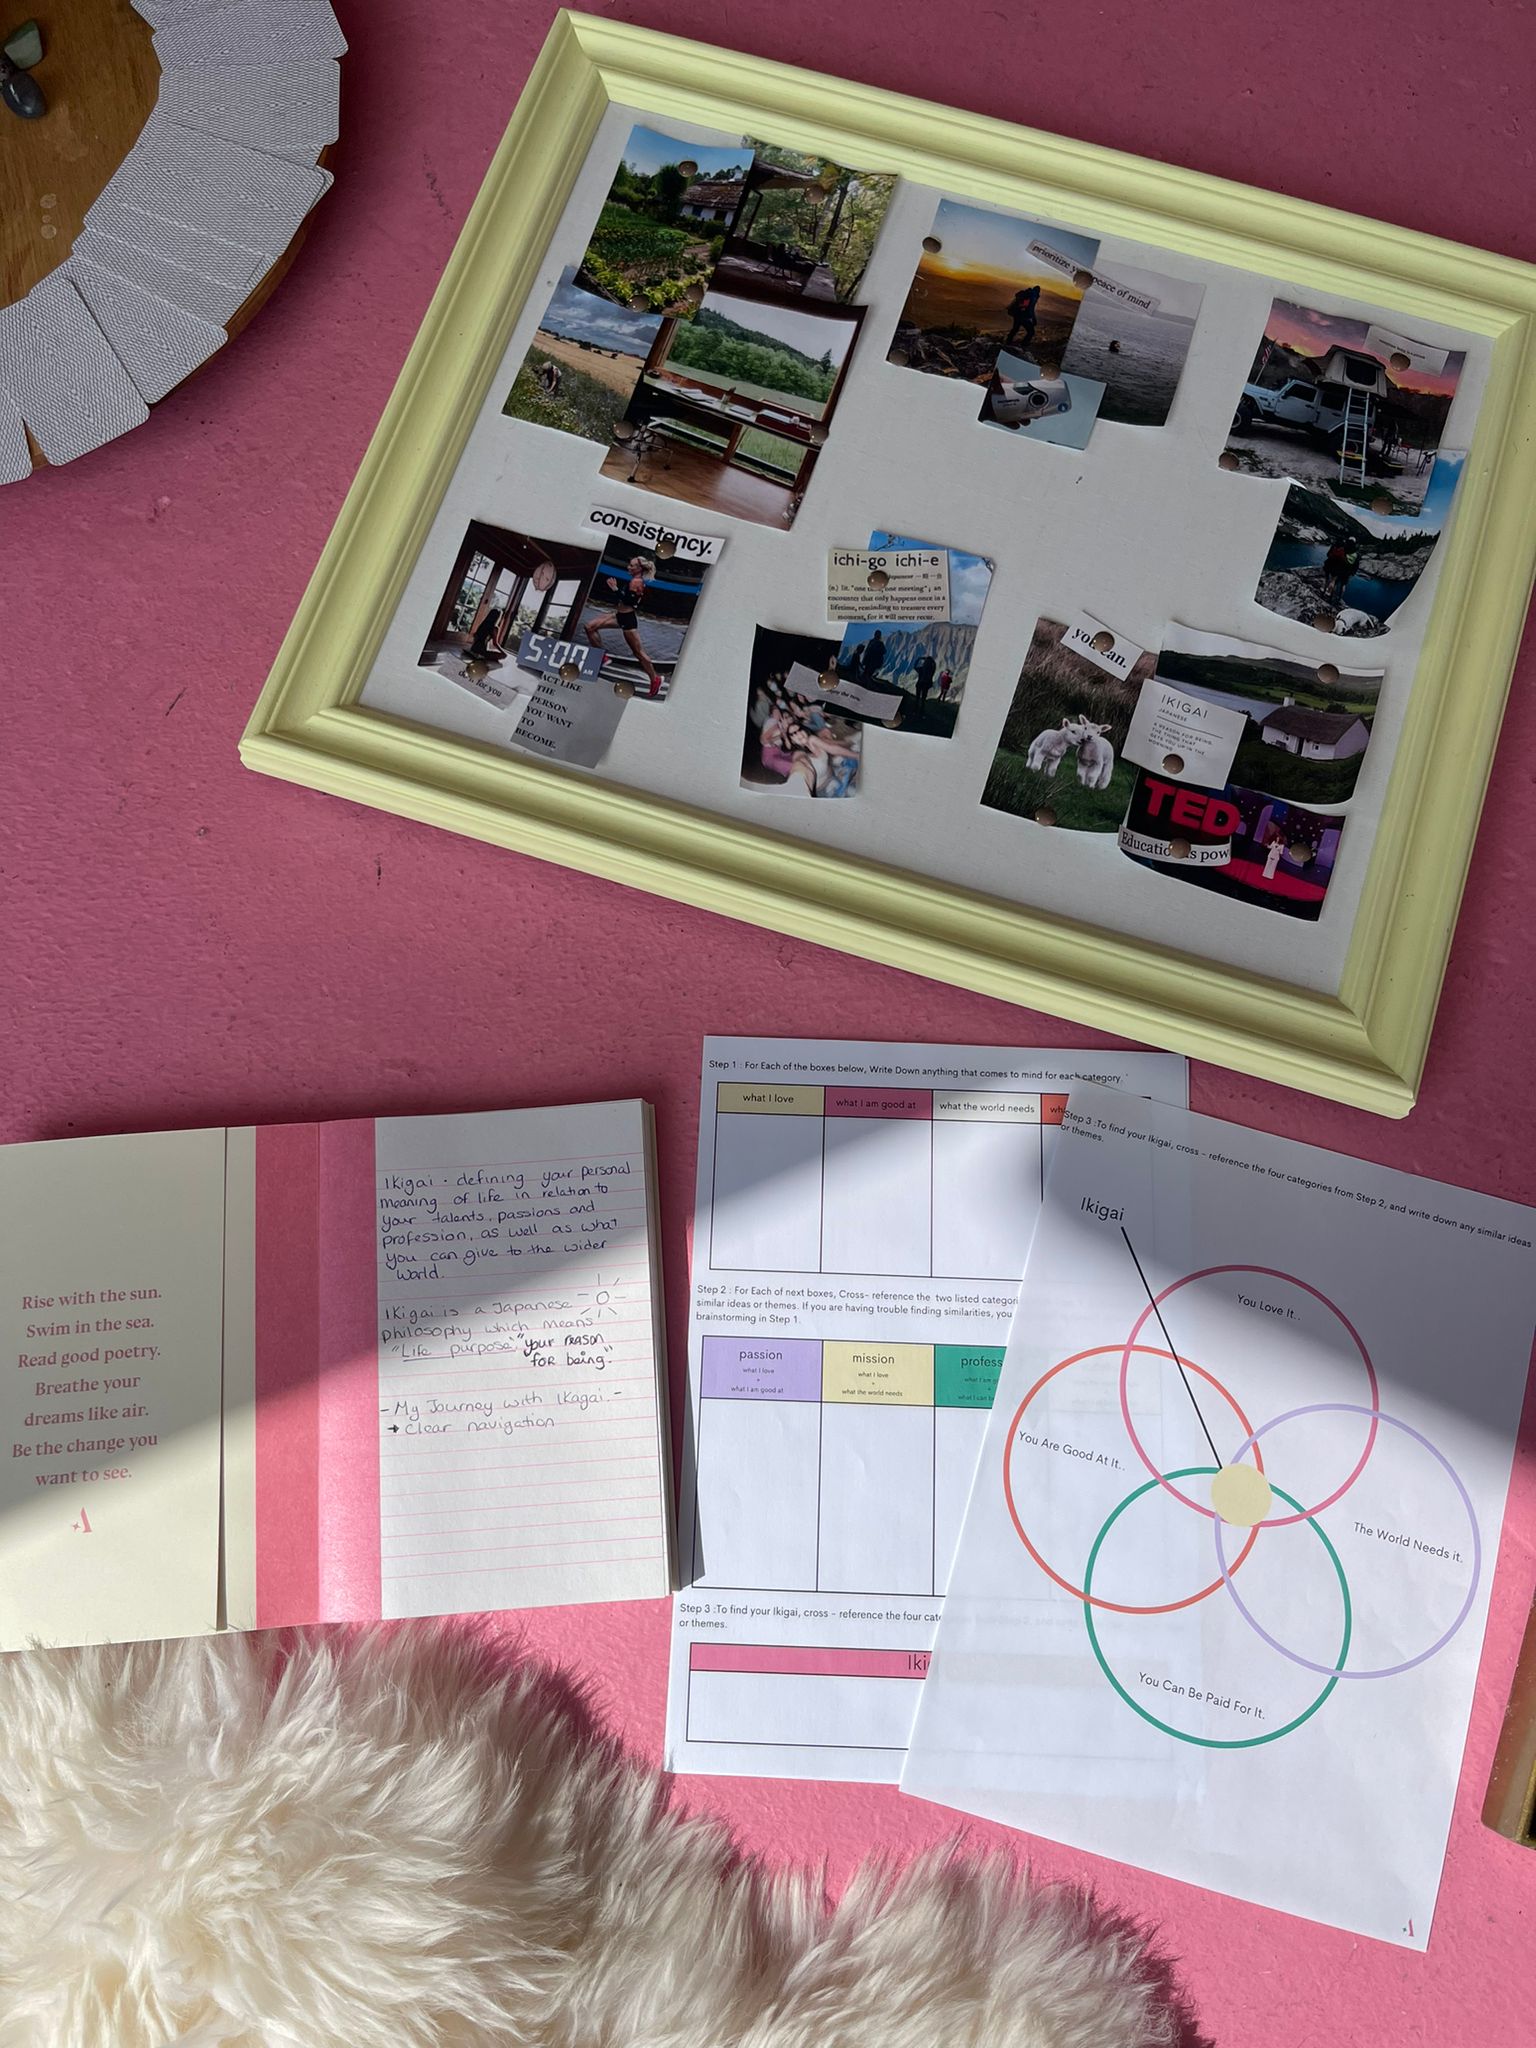 Reconnect | Cacao, Ikagai & Vision Board Workshop - May 19th